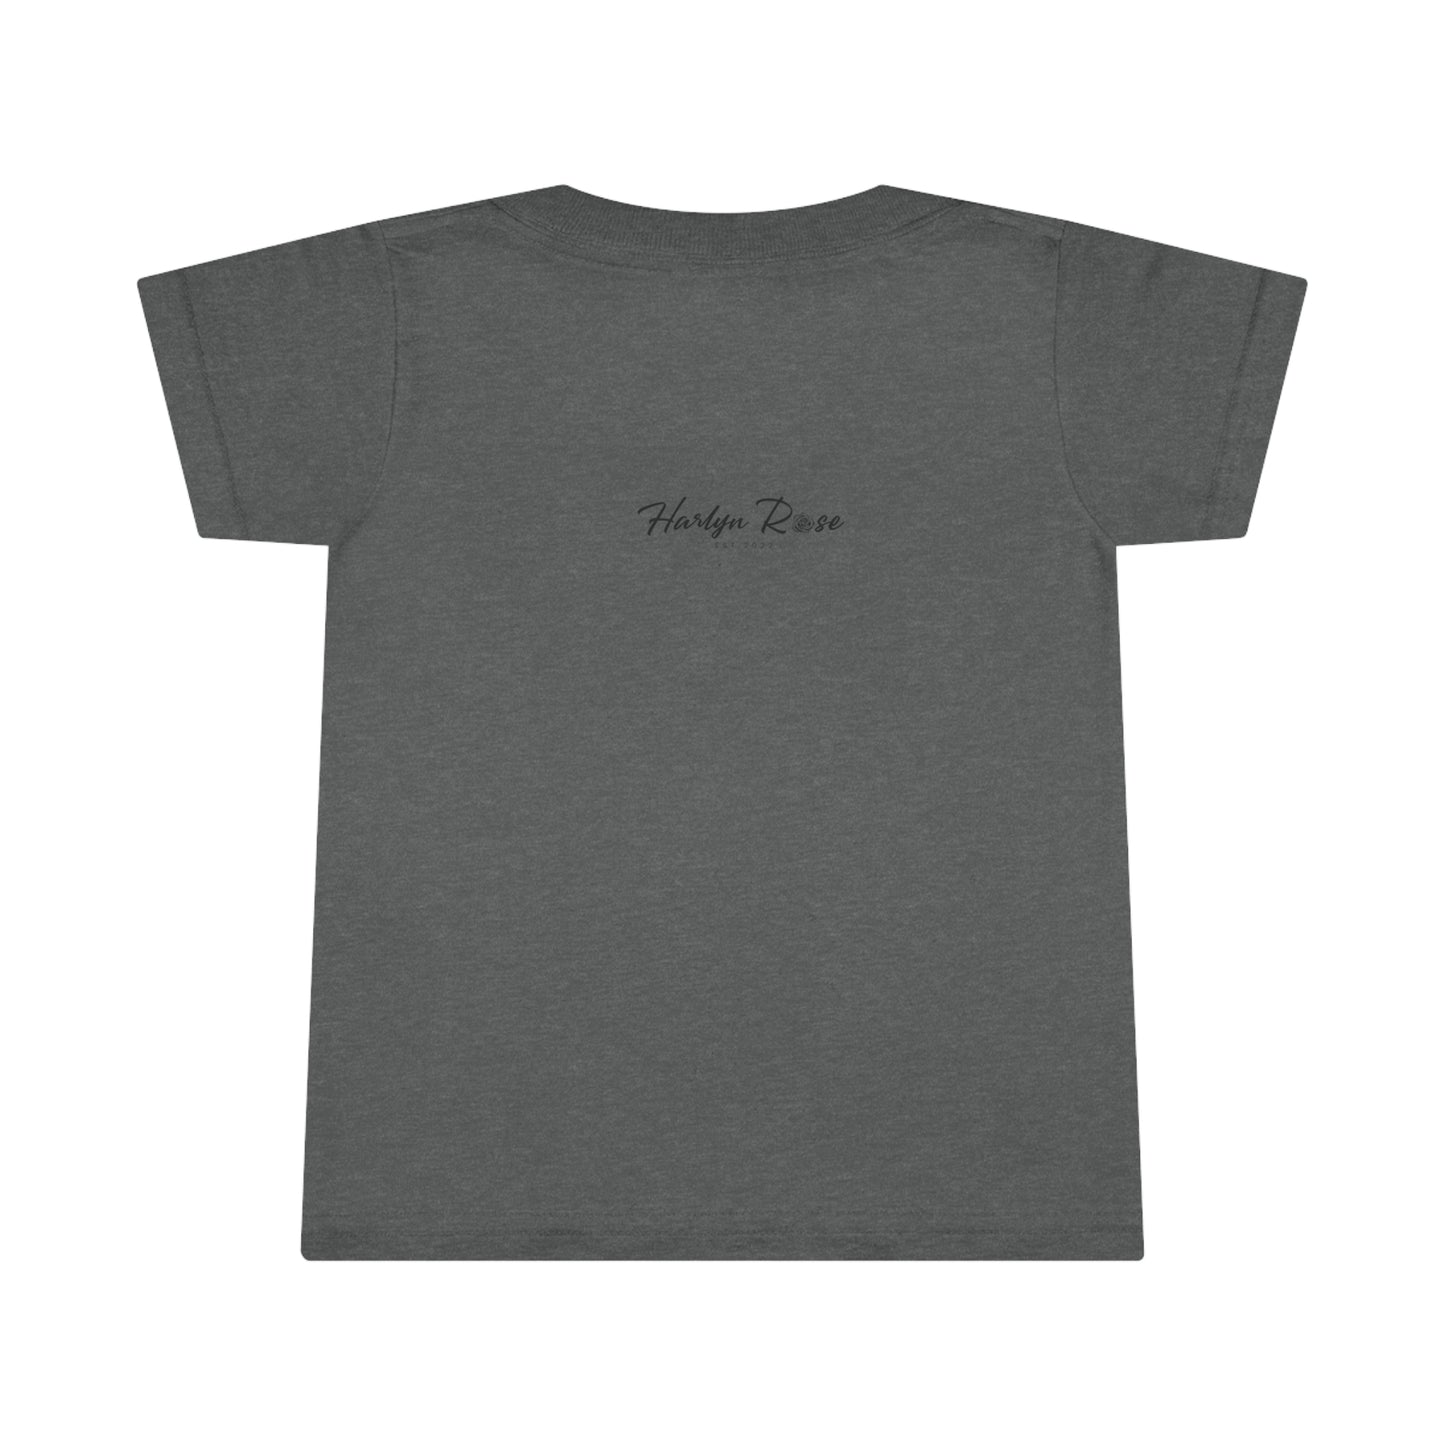 Toddler T-shirt - It's not the destination. It's the journey.